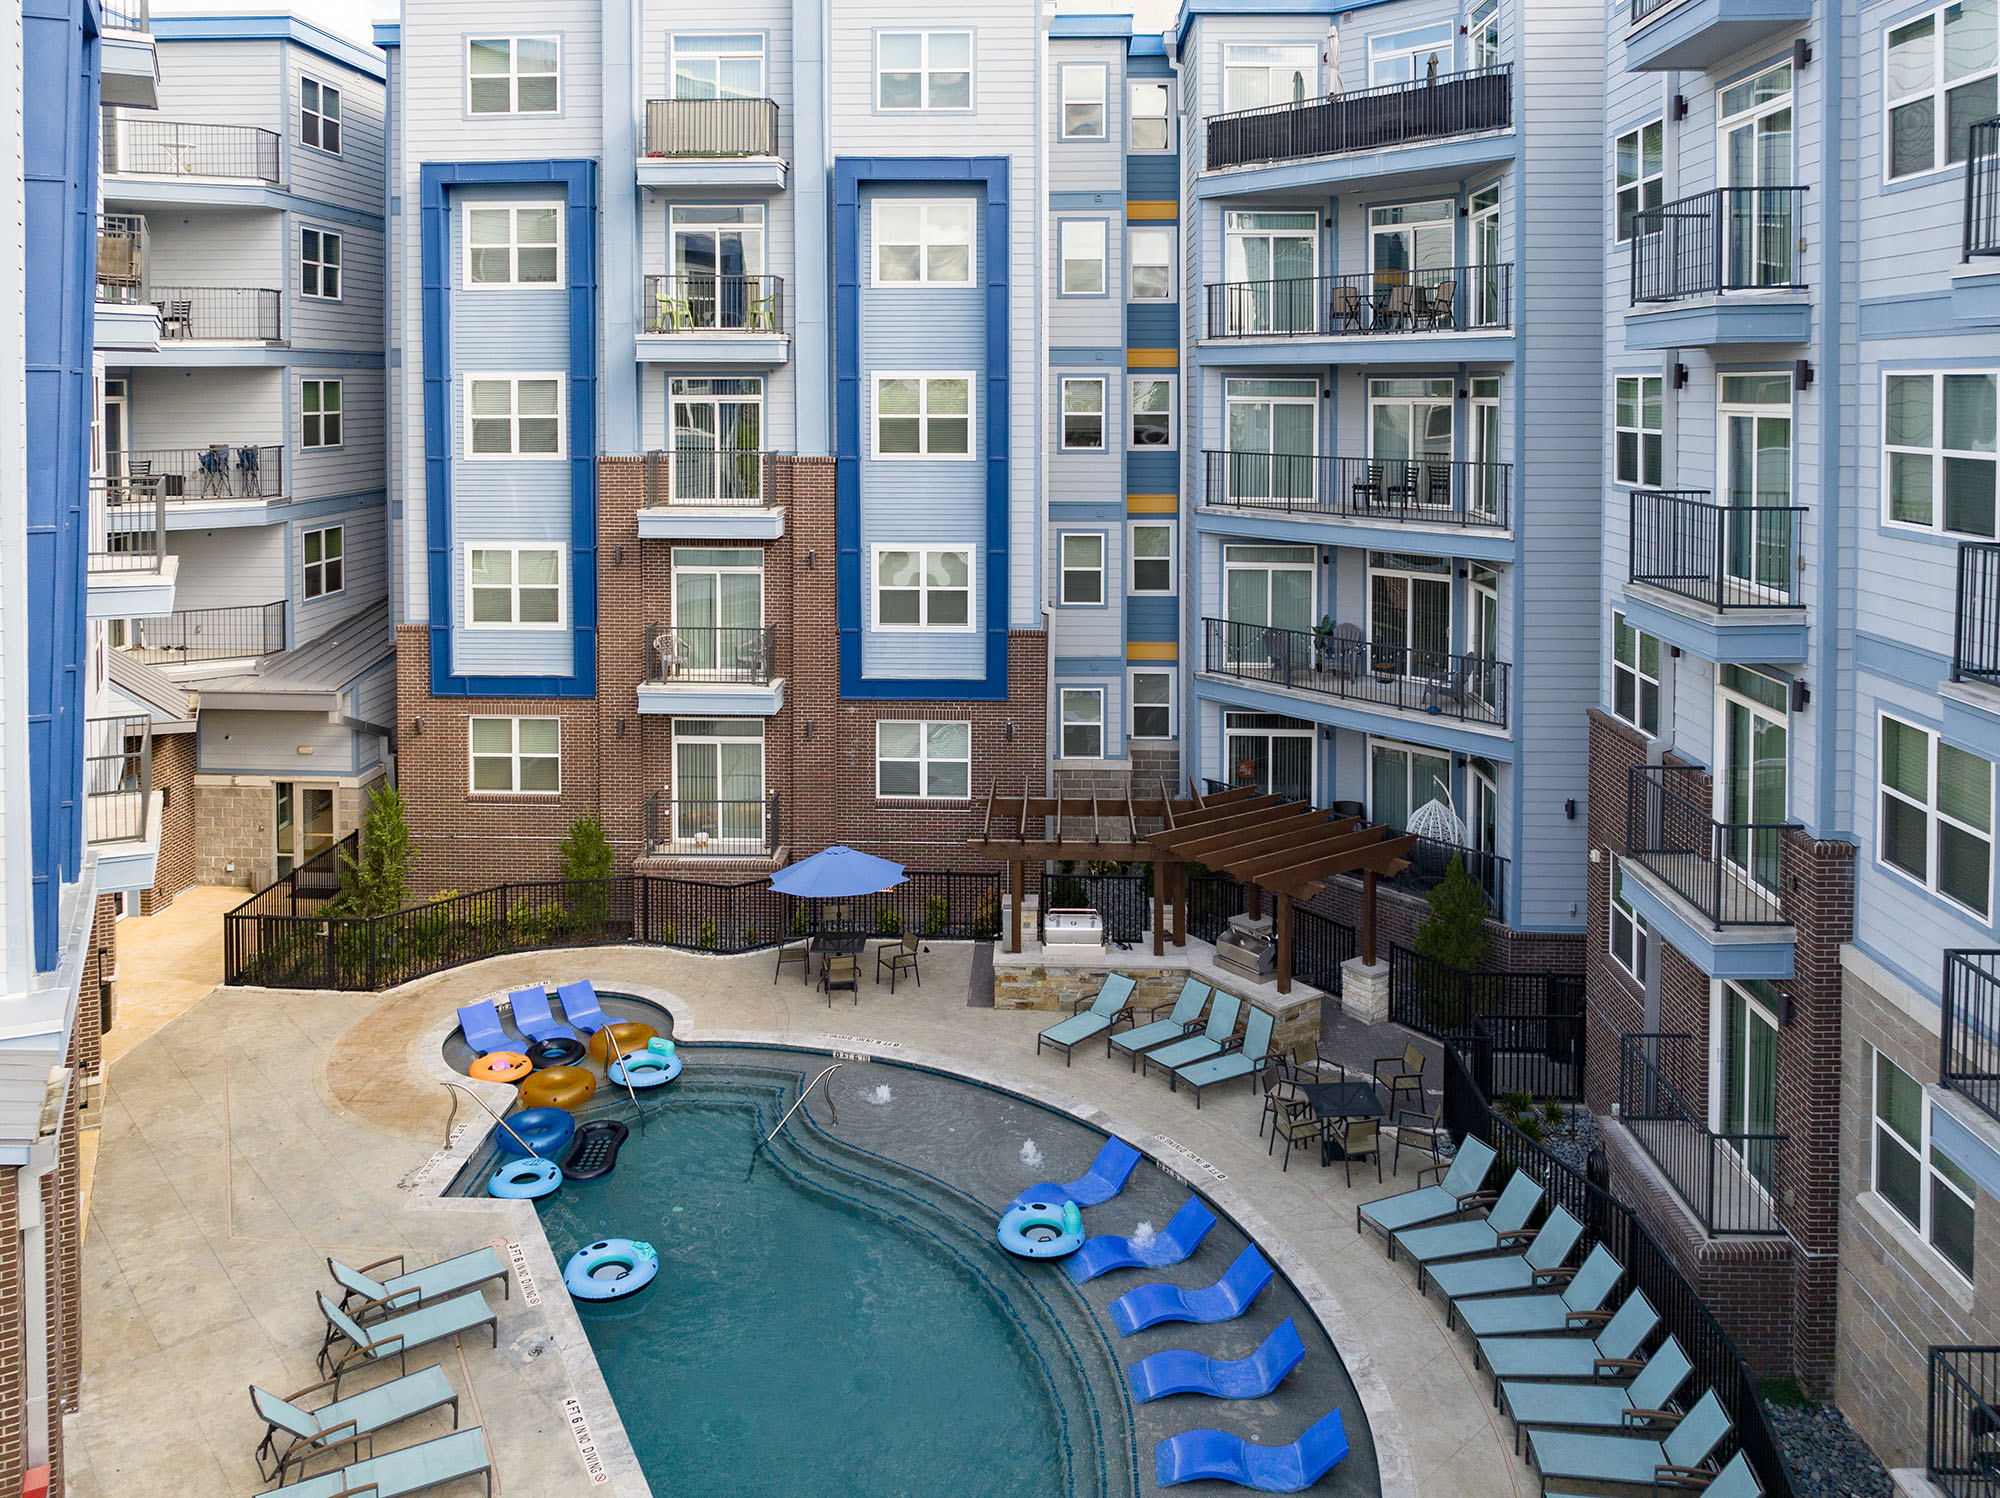 Pool at student housing community